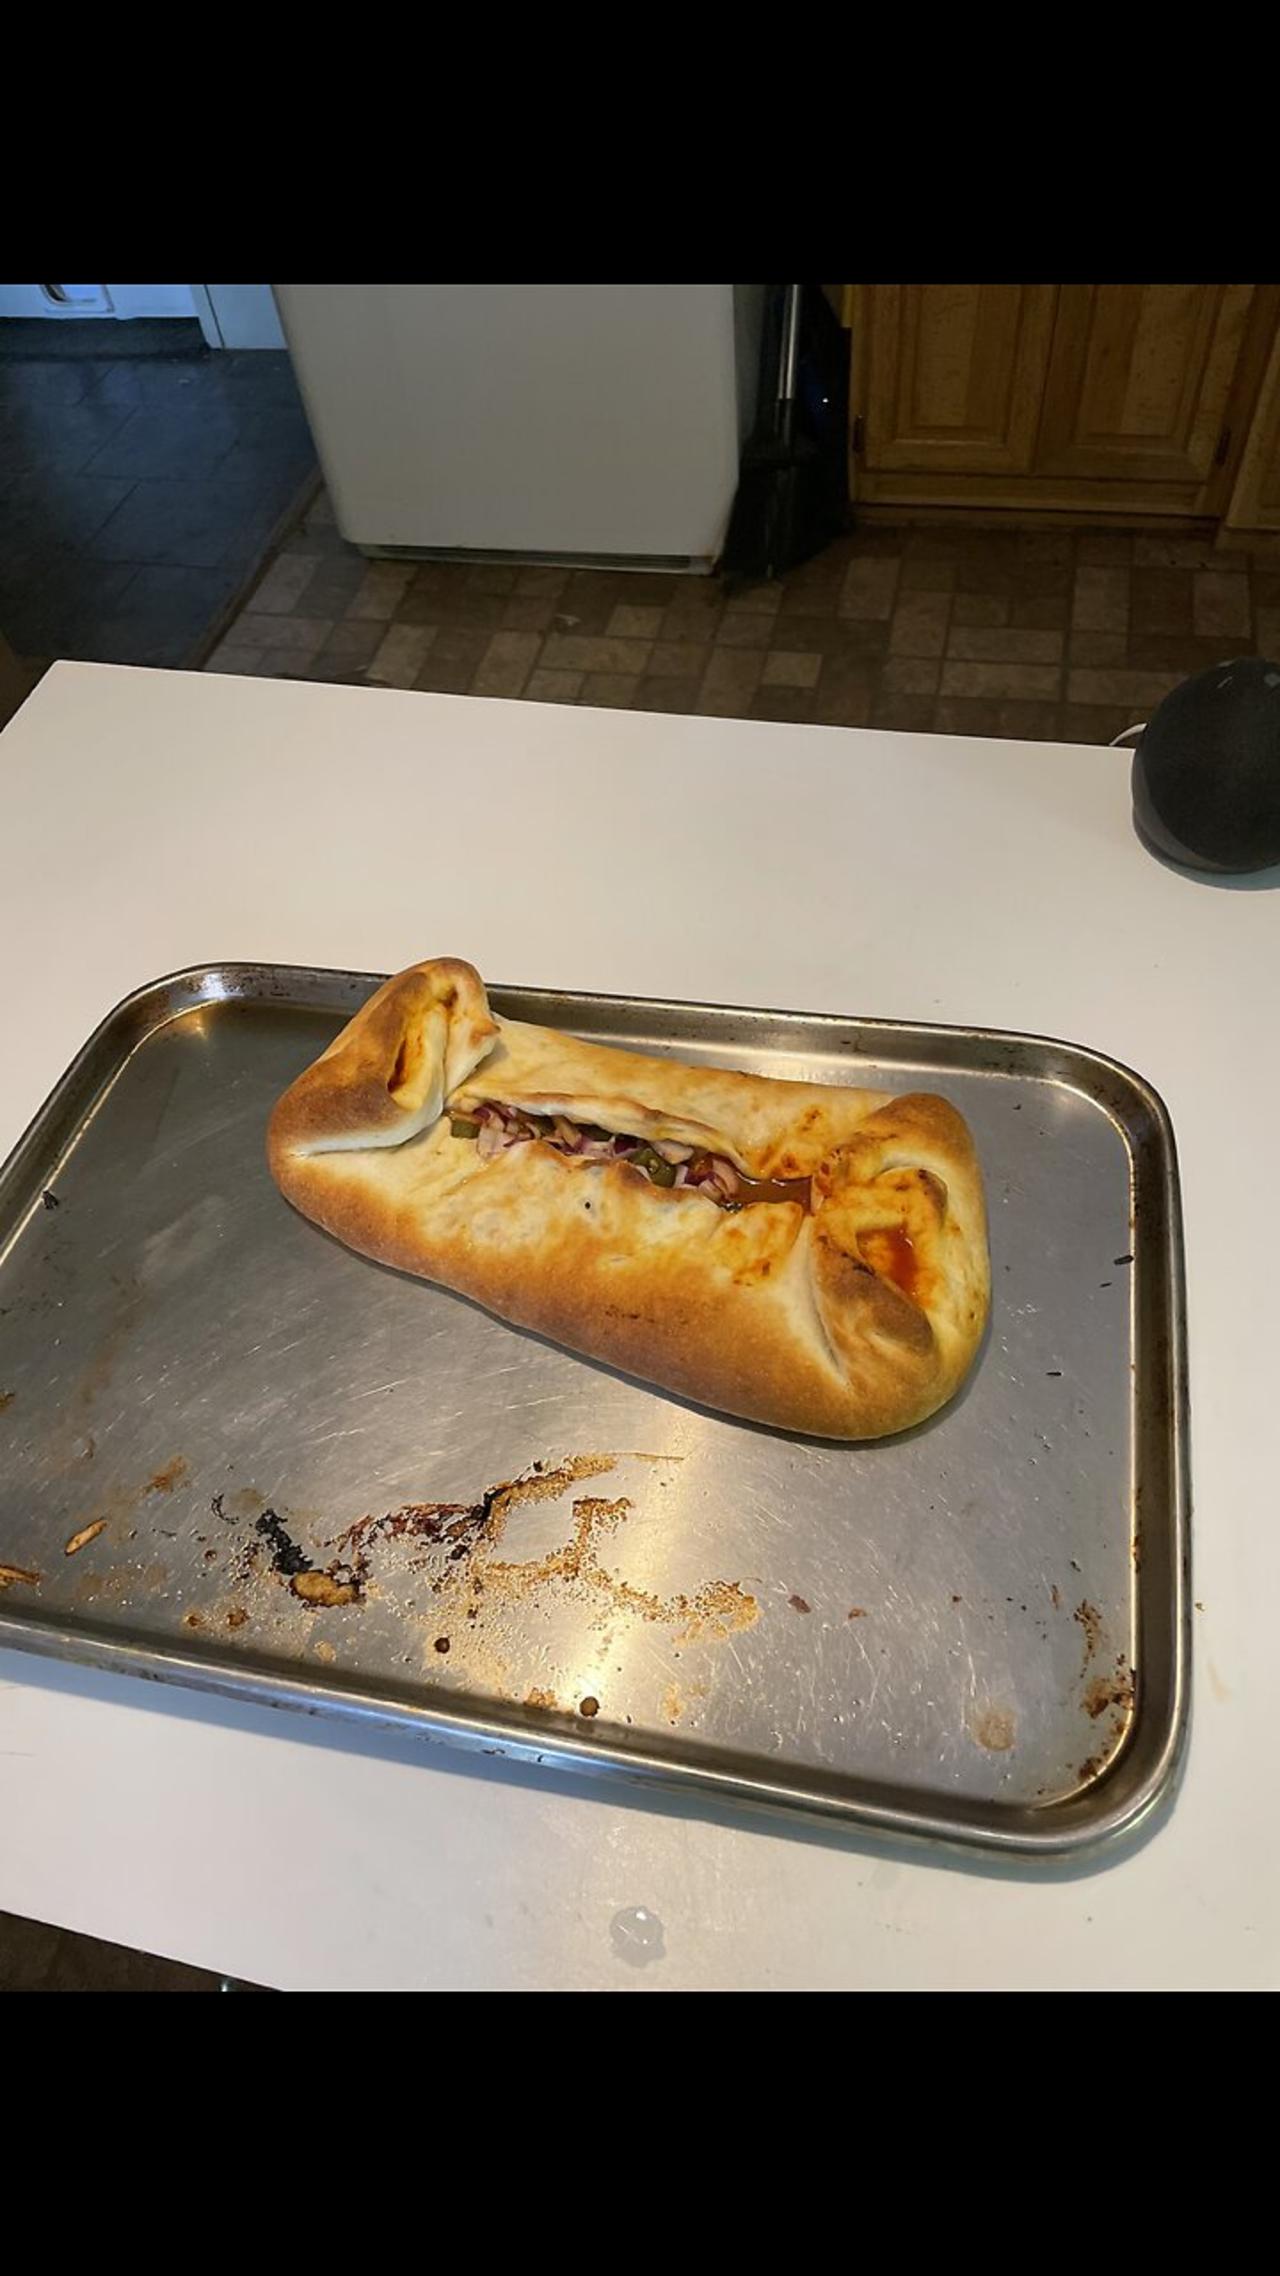 Cooking Vegan With Chad episode 2: Stromboli